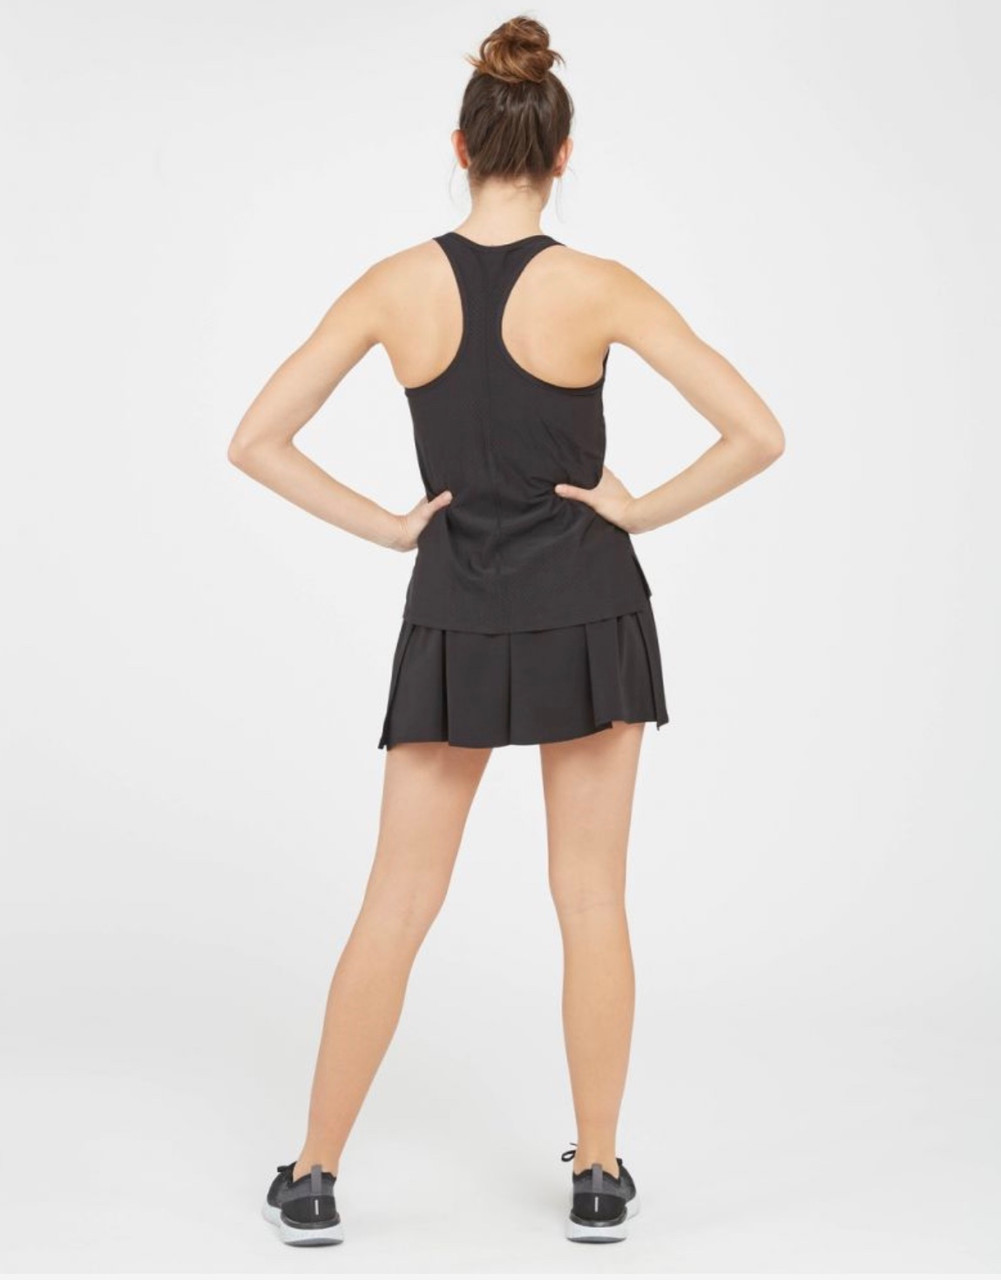 SPANX - There's no *skort*-ing around this - our Get Moving Skort is  versatile, confidence boosting & made with pockets. It's your activewear  *match* made in heaven 🎾 #SpanxActivewear #Spanx #Activewear Shop